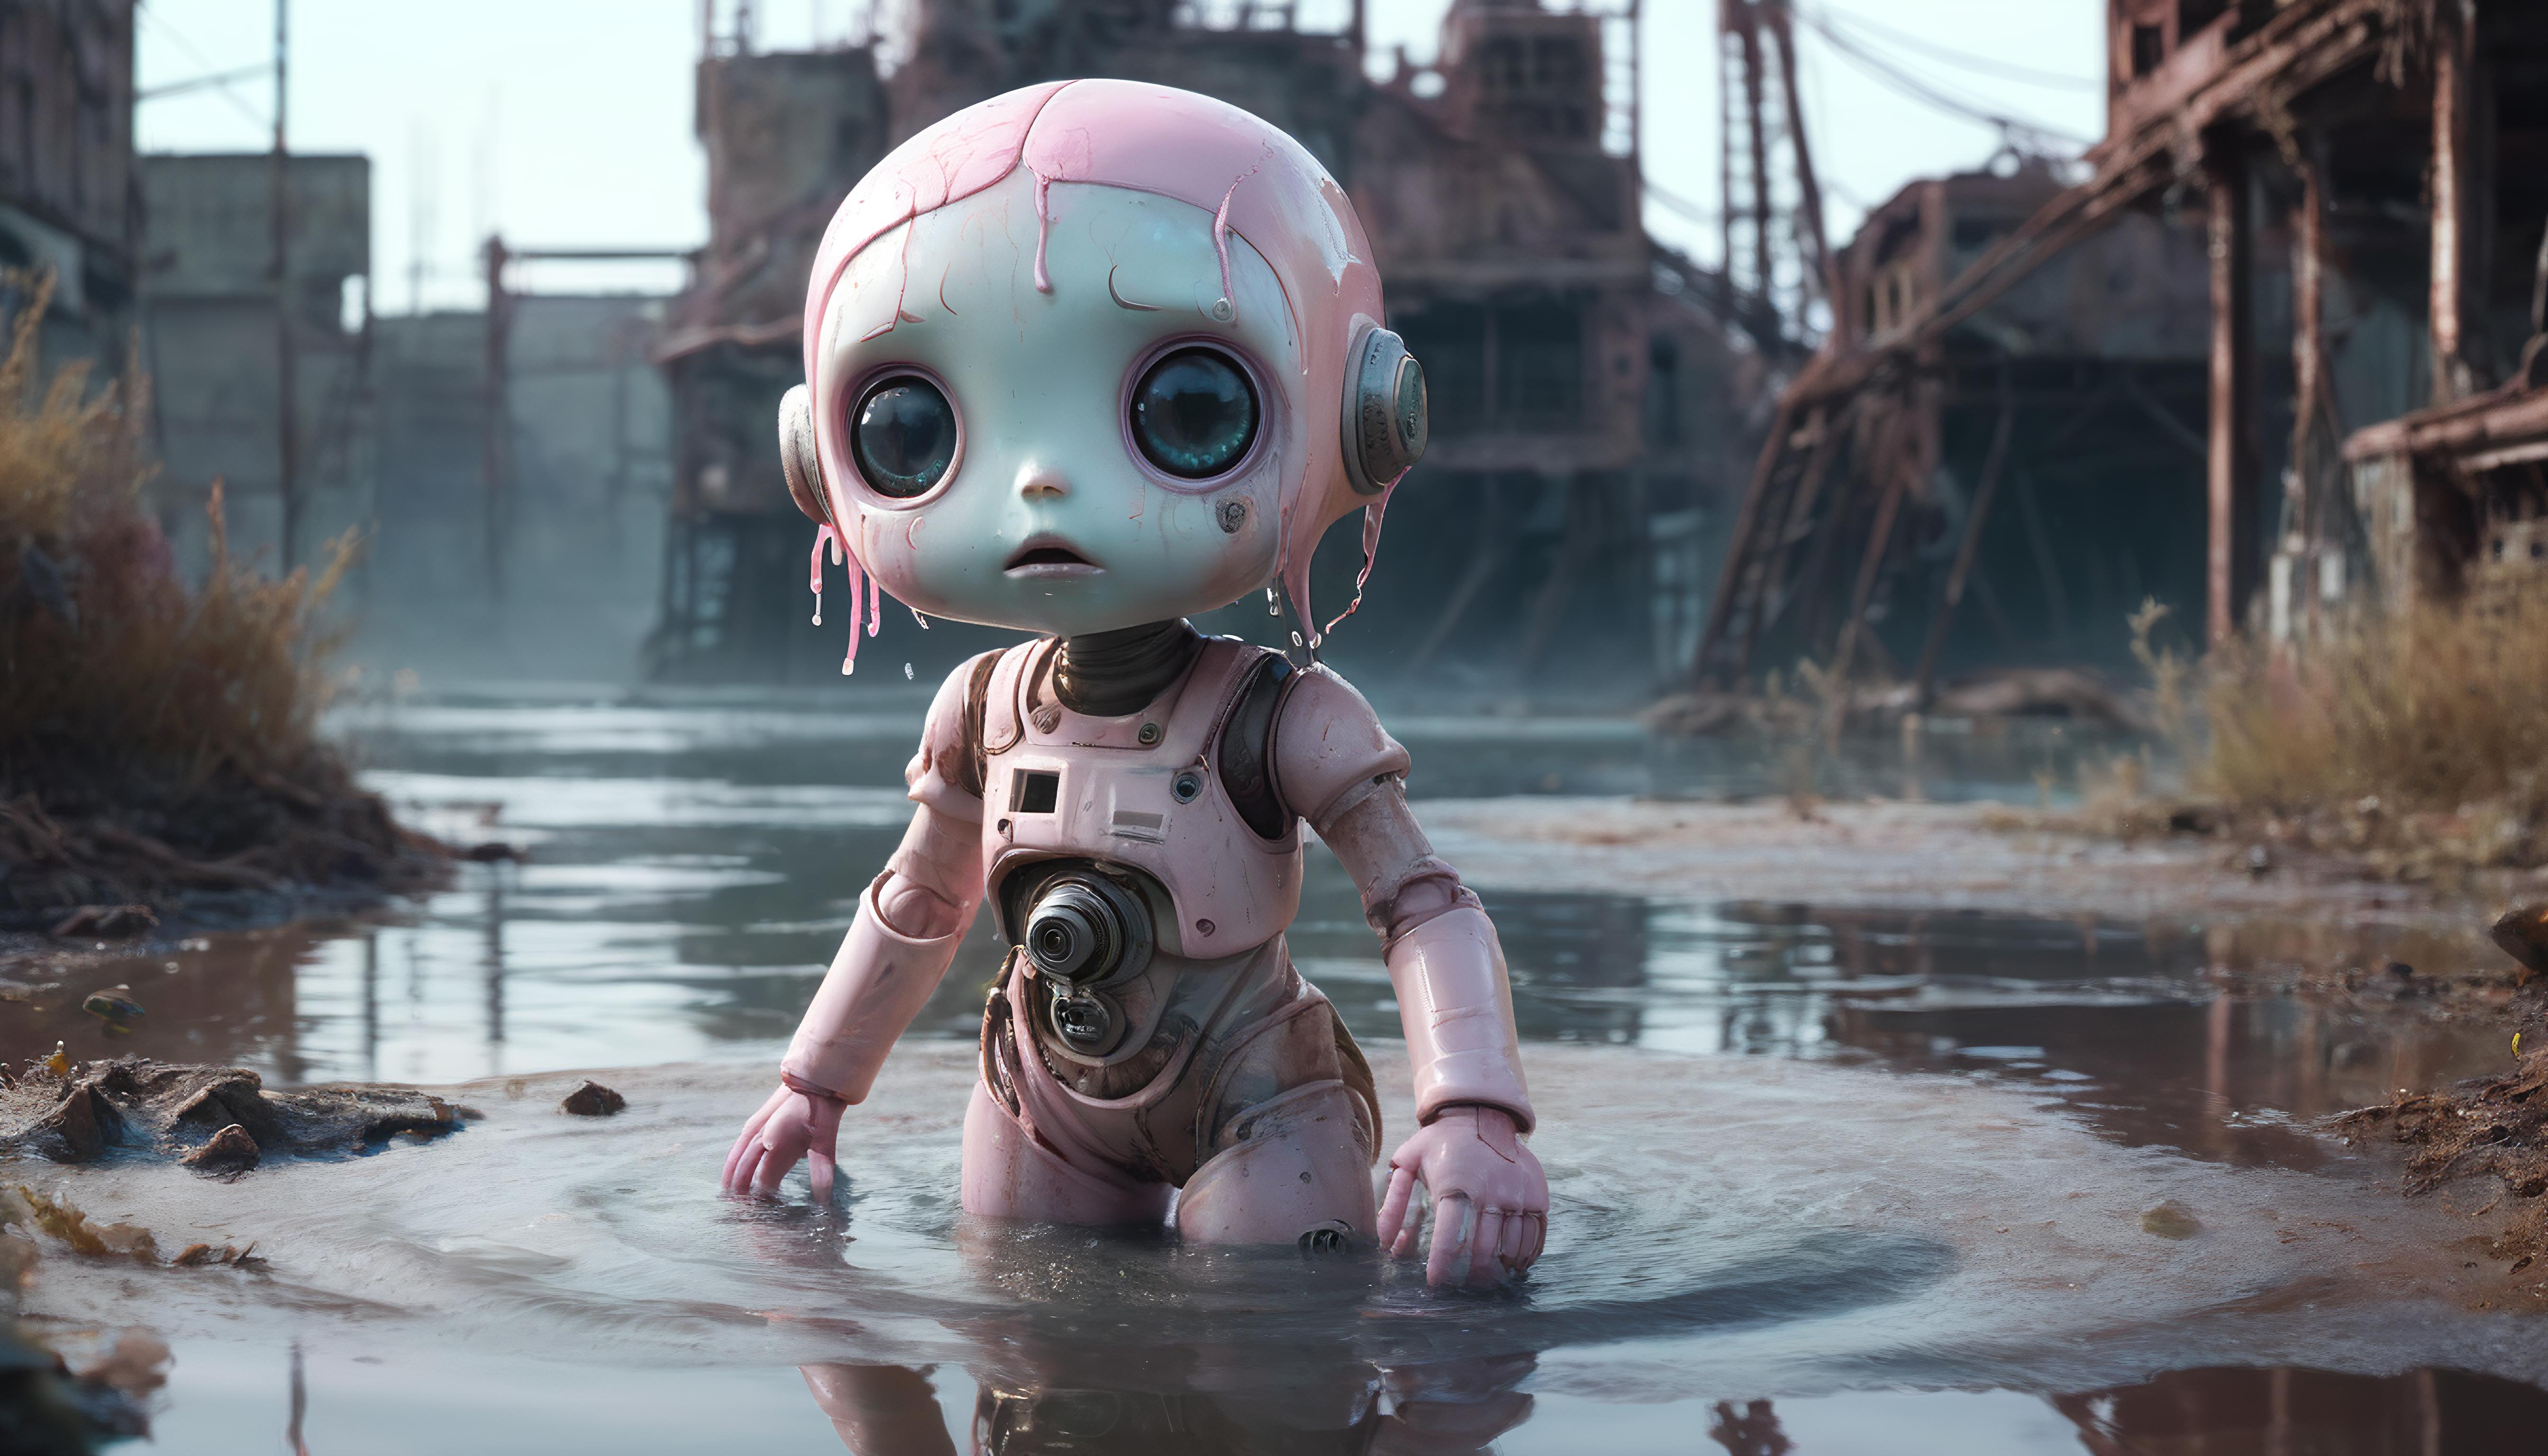 A pink doll in water, with a background of a rusty building.